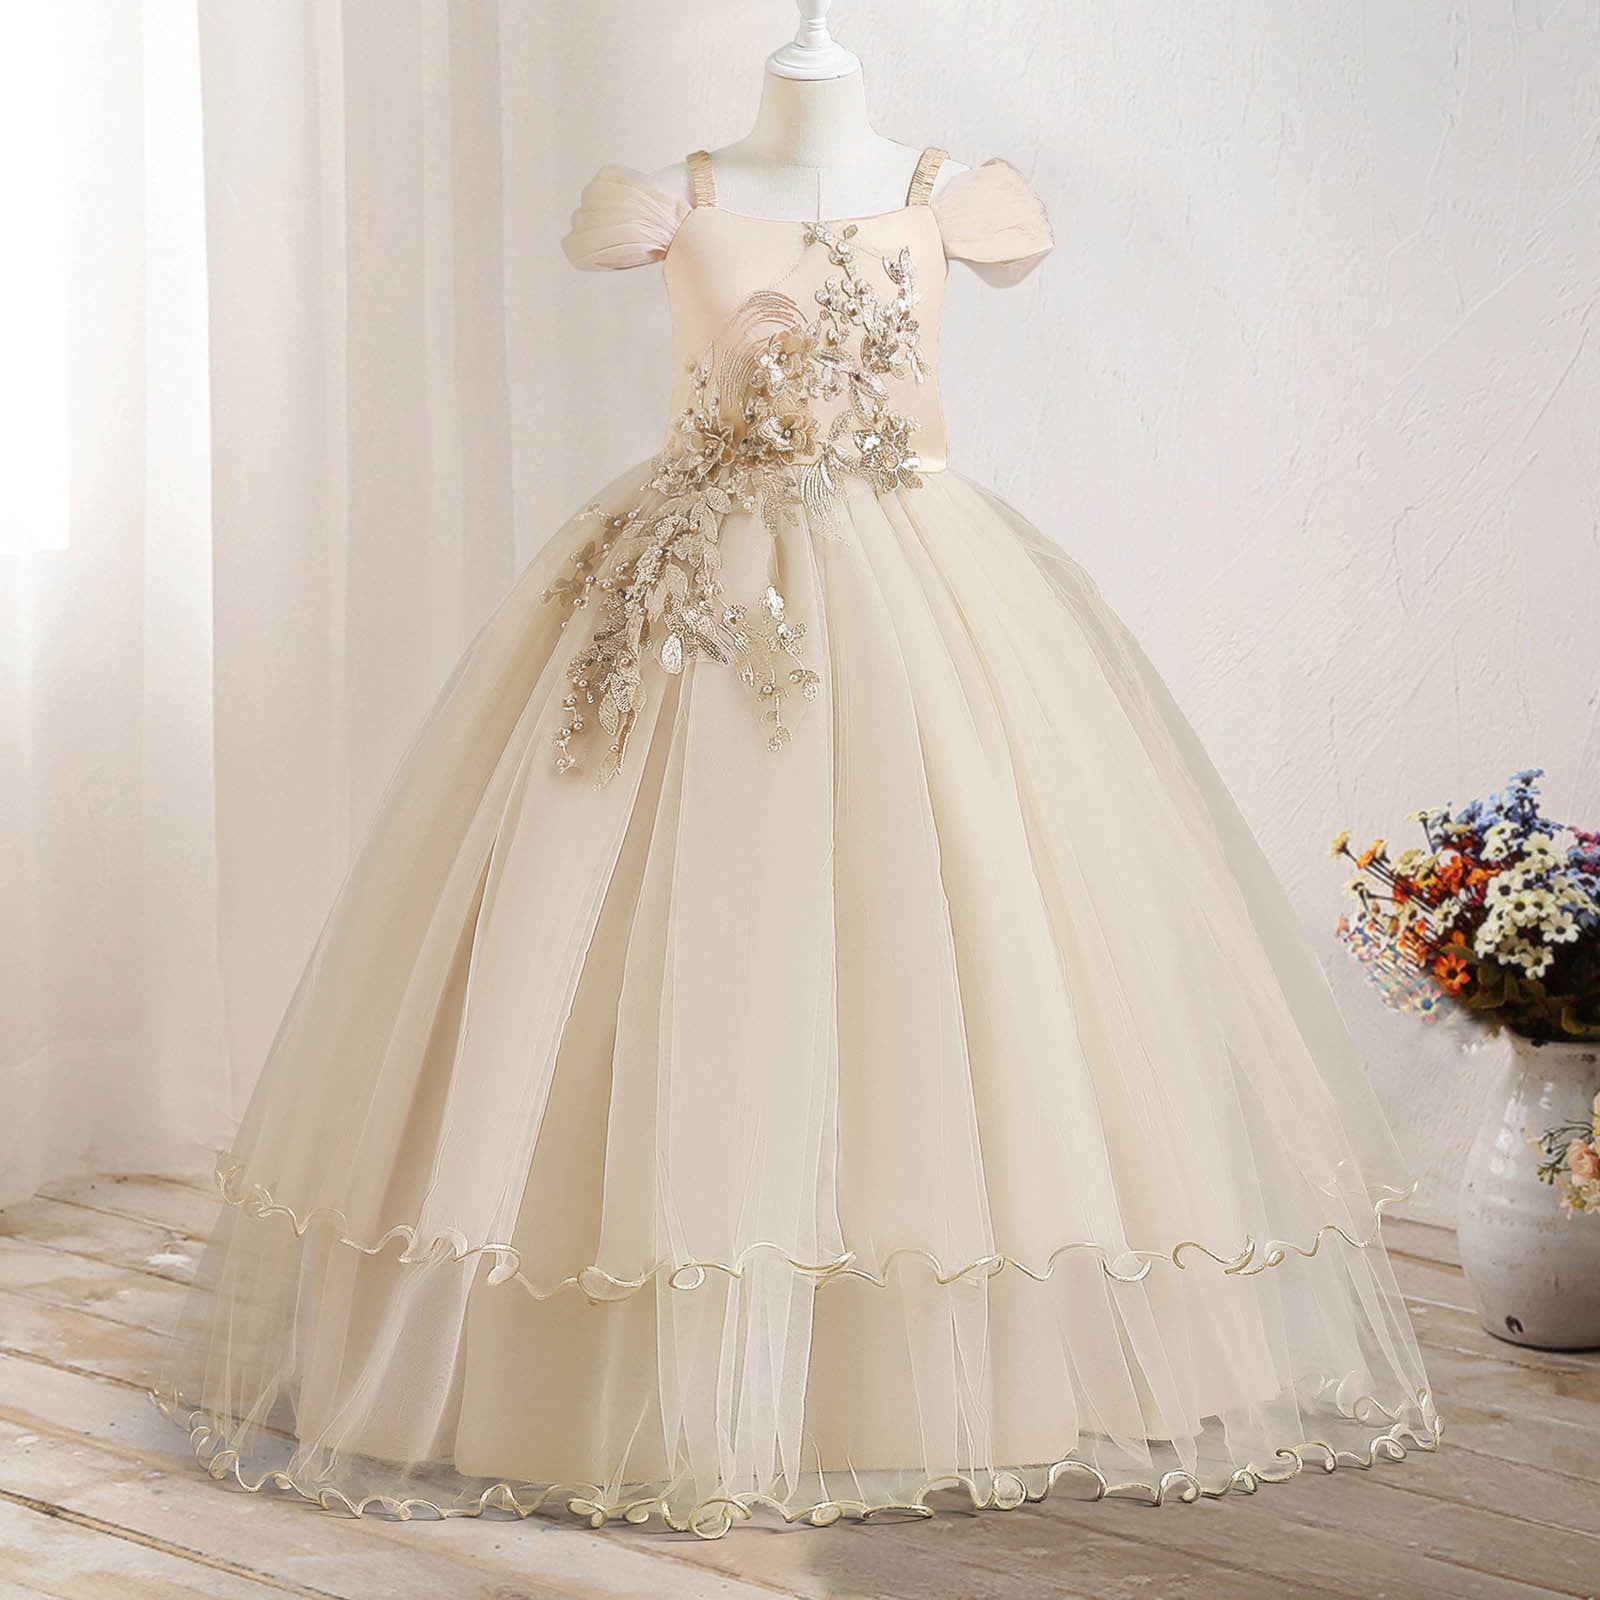 Luxury Handmade Princess Embroidered Wedding Dress With Embroidery, Jewel  Neck, And Elegant Floral Details From Xzy1984316, $472.37 | DHgate.Com